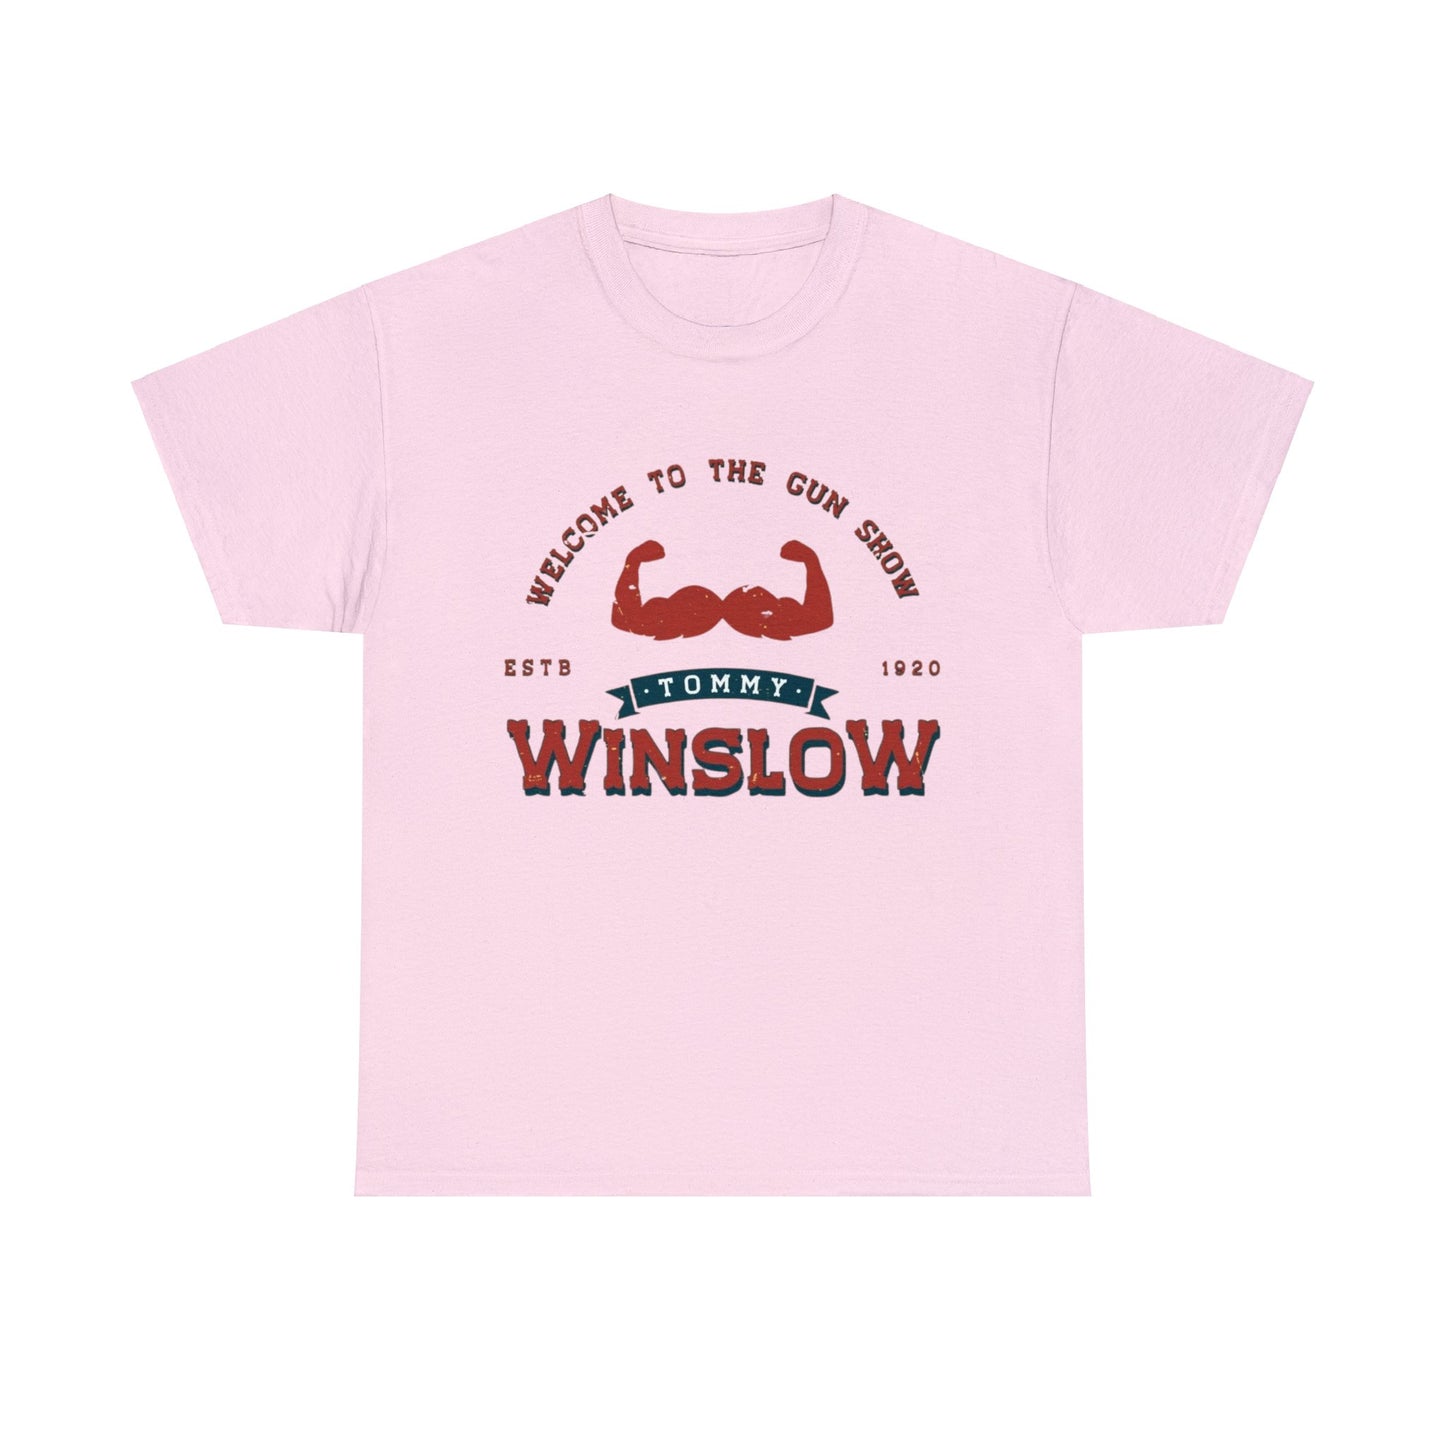 Tommy "The Gun" Winslow - 'Welcome to the gun show' Printed Tee